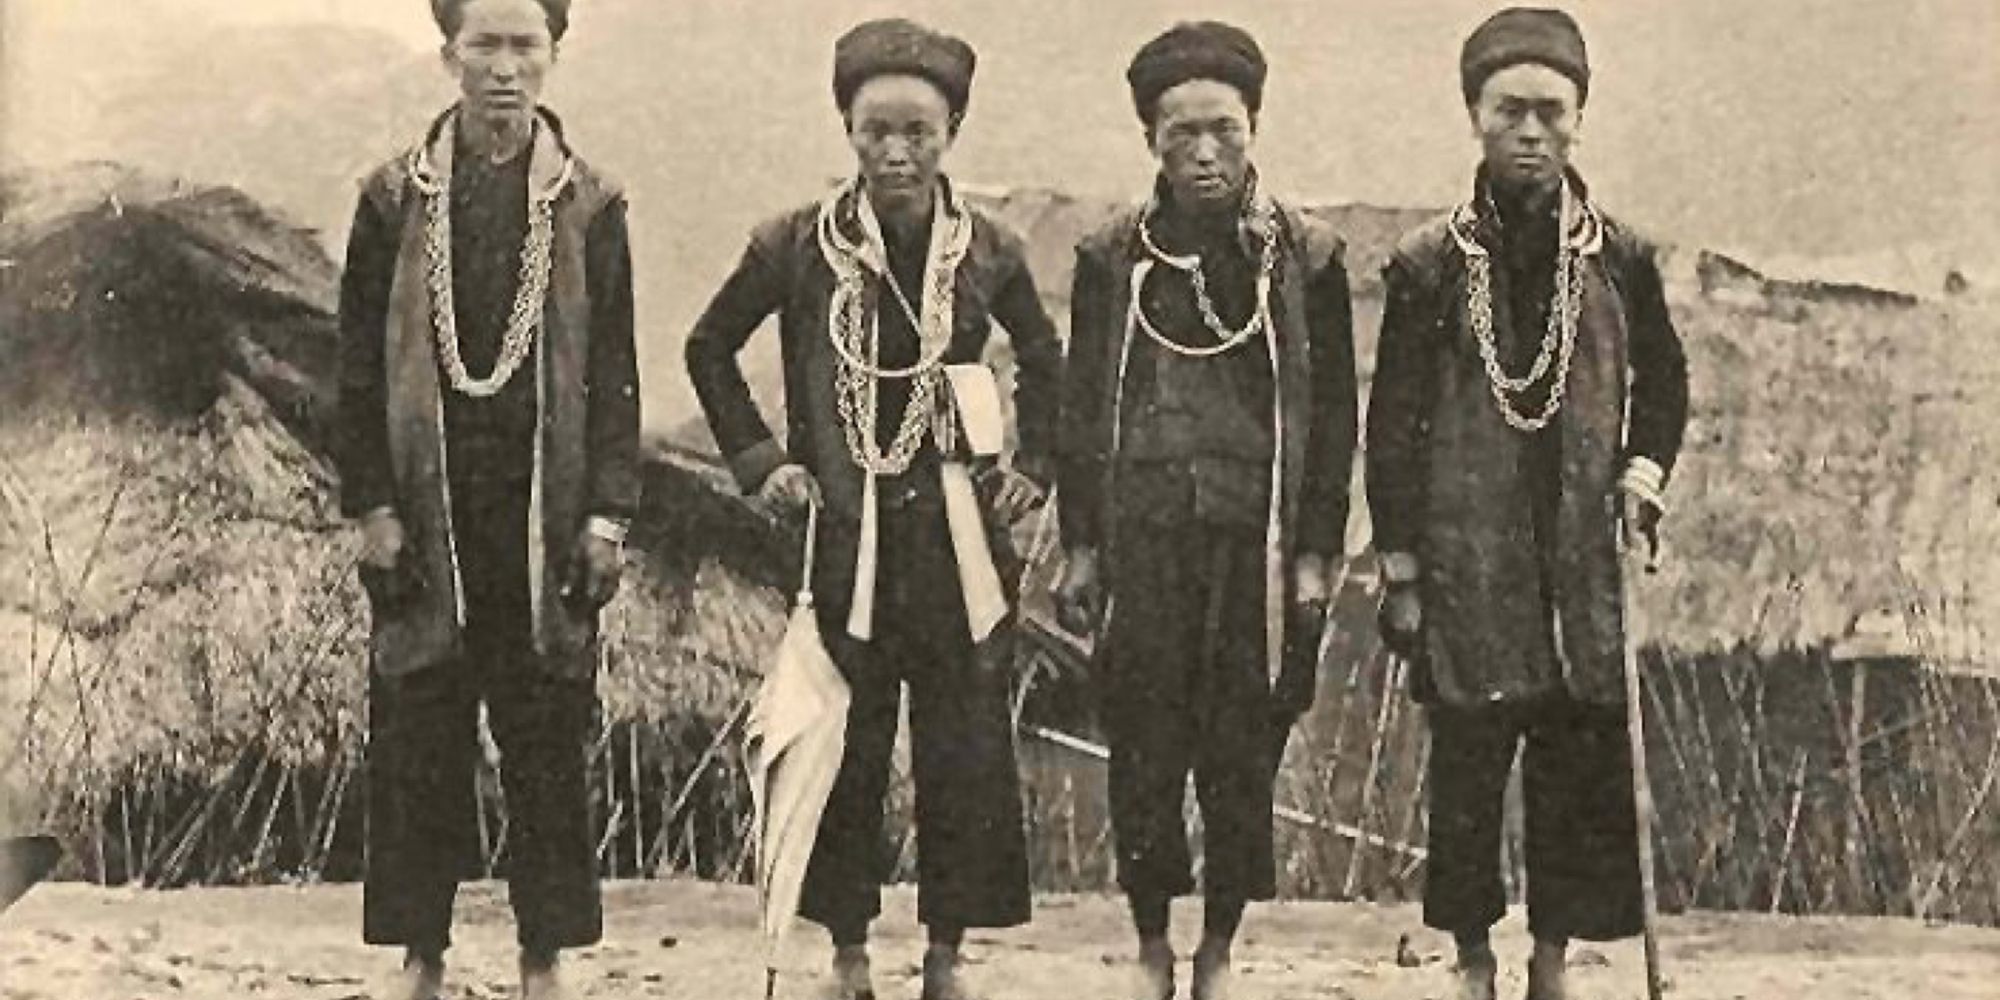 Hmong resistance fighters in the war of the insane